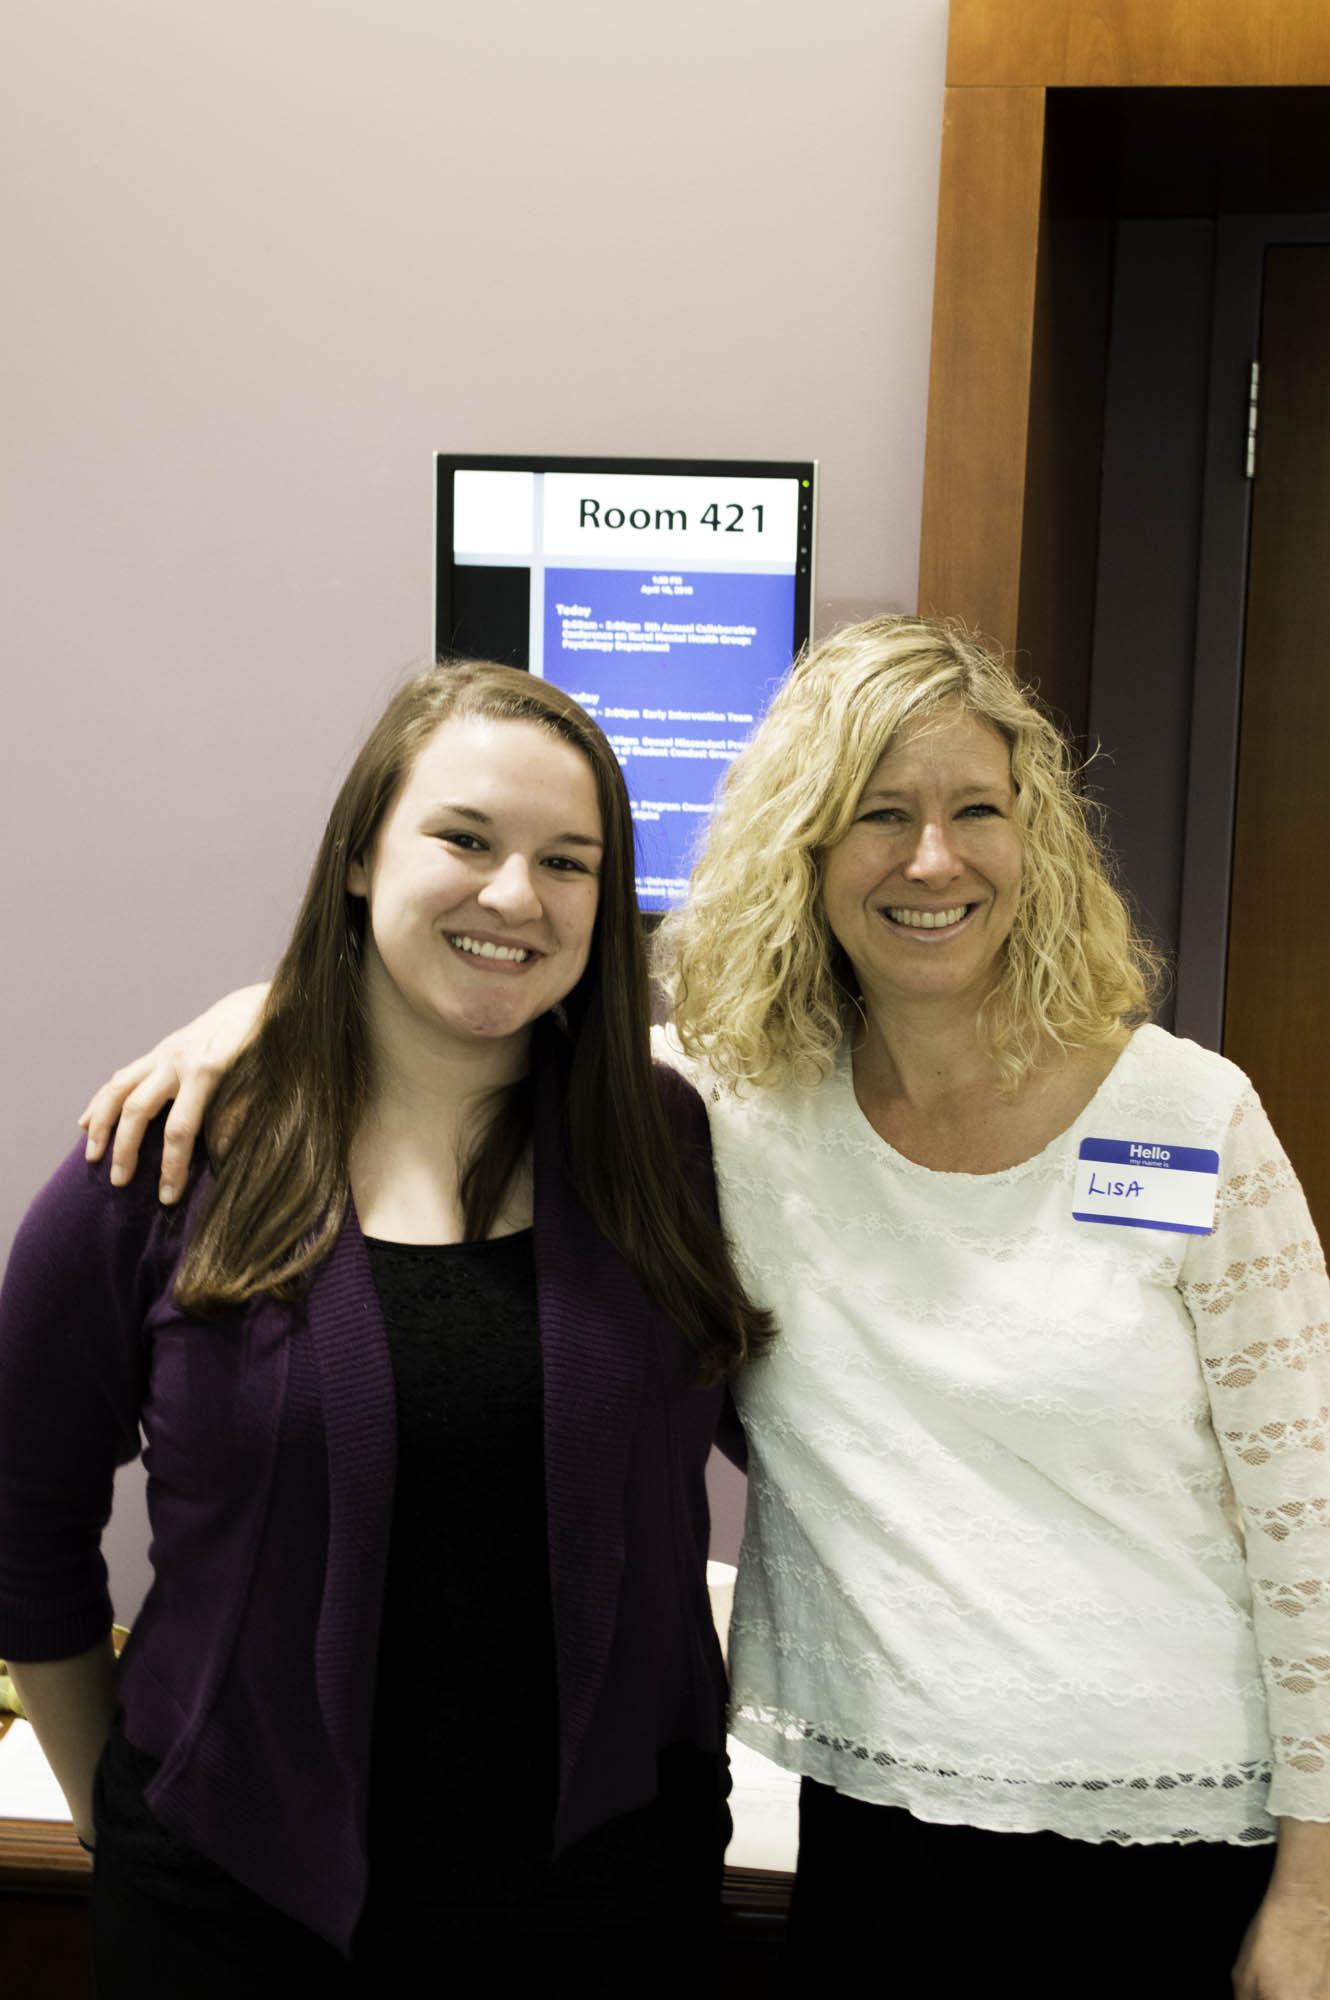 Appalachian pyschology professor Lisa Curtin (right) poses with a student at a conference. Photo: Jordan Kimbrell